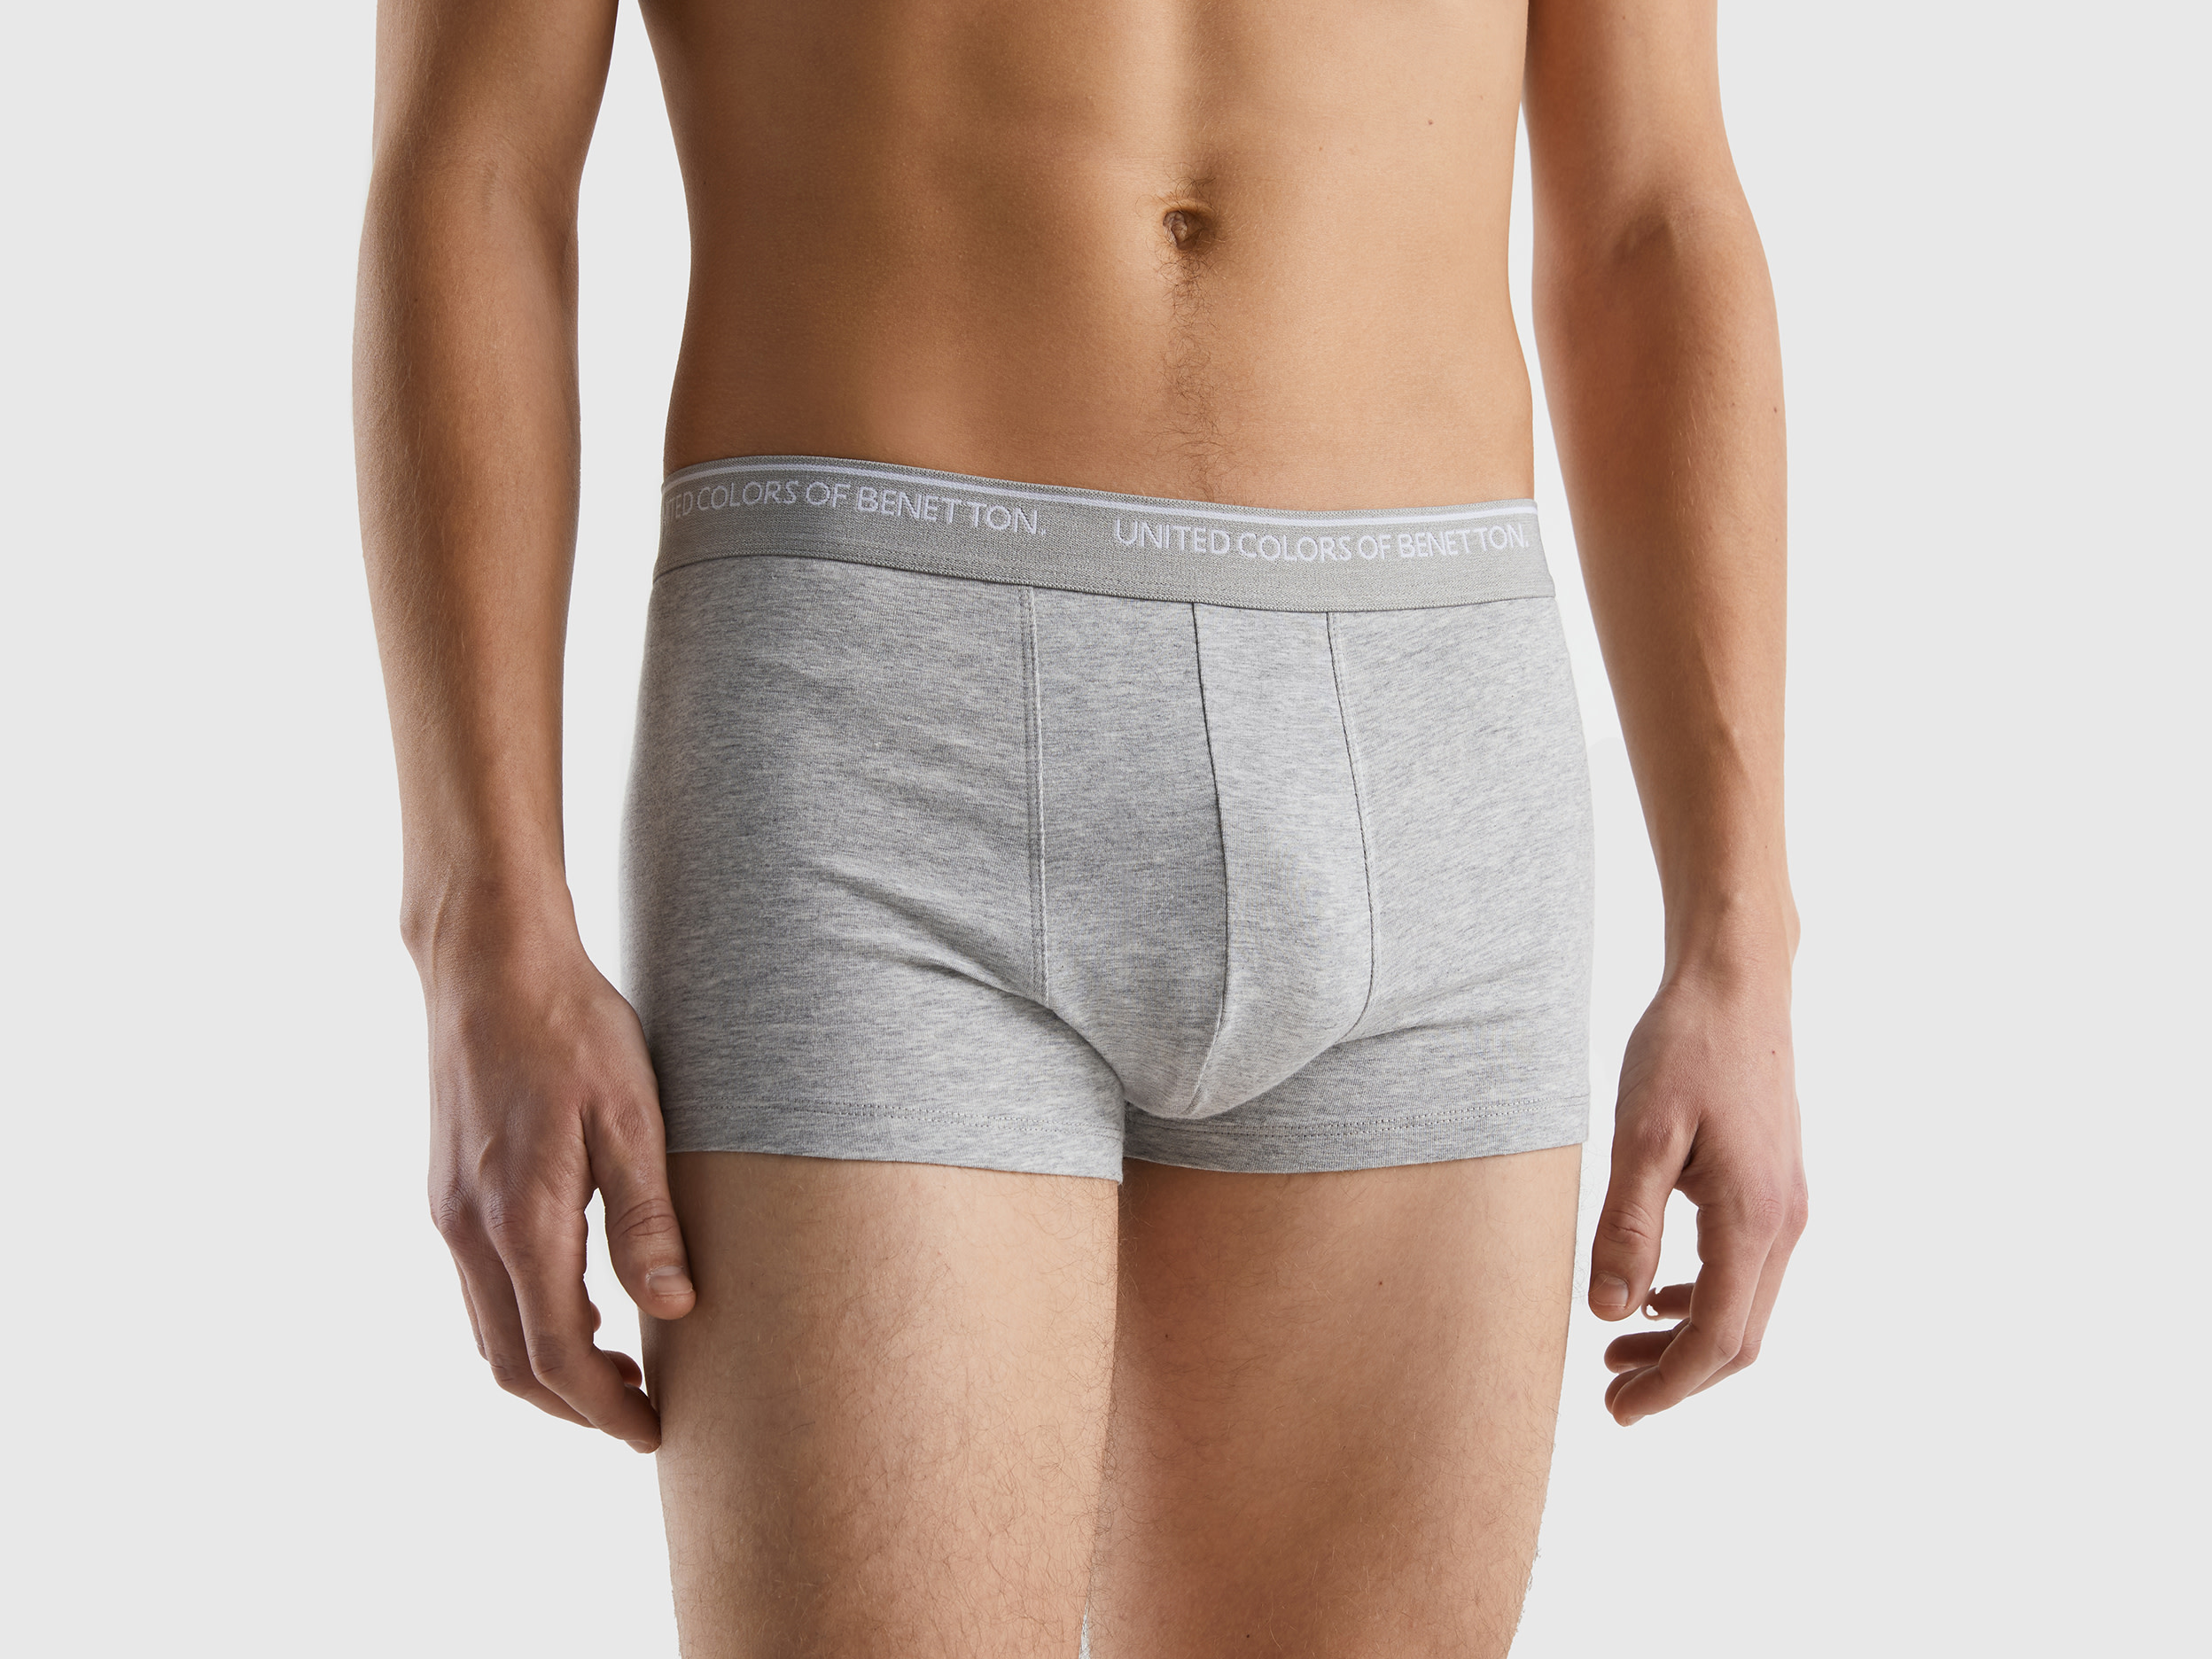 Benetton, Fitted Boxers In Organic Cotton, size S, Light Gray, Men